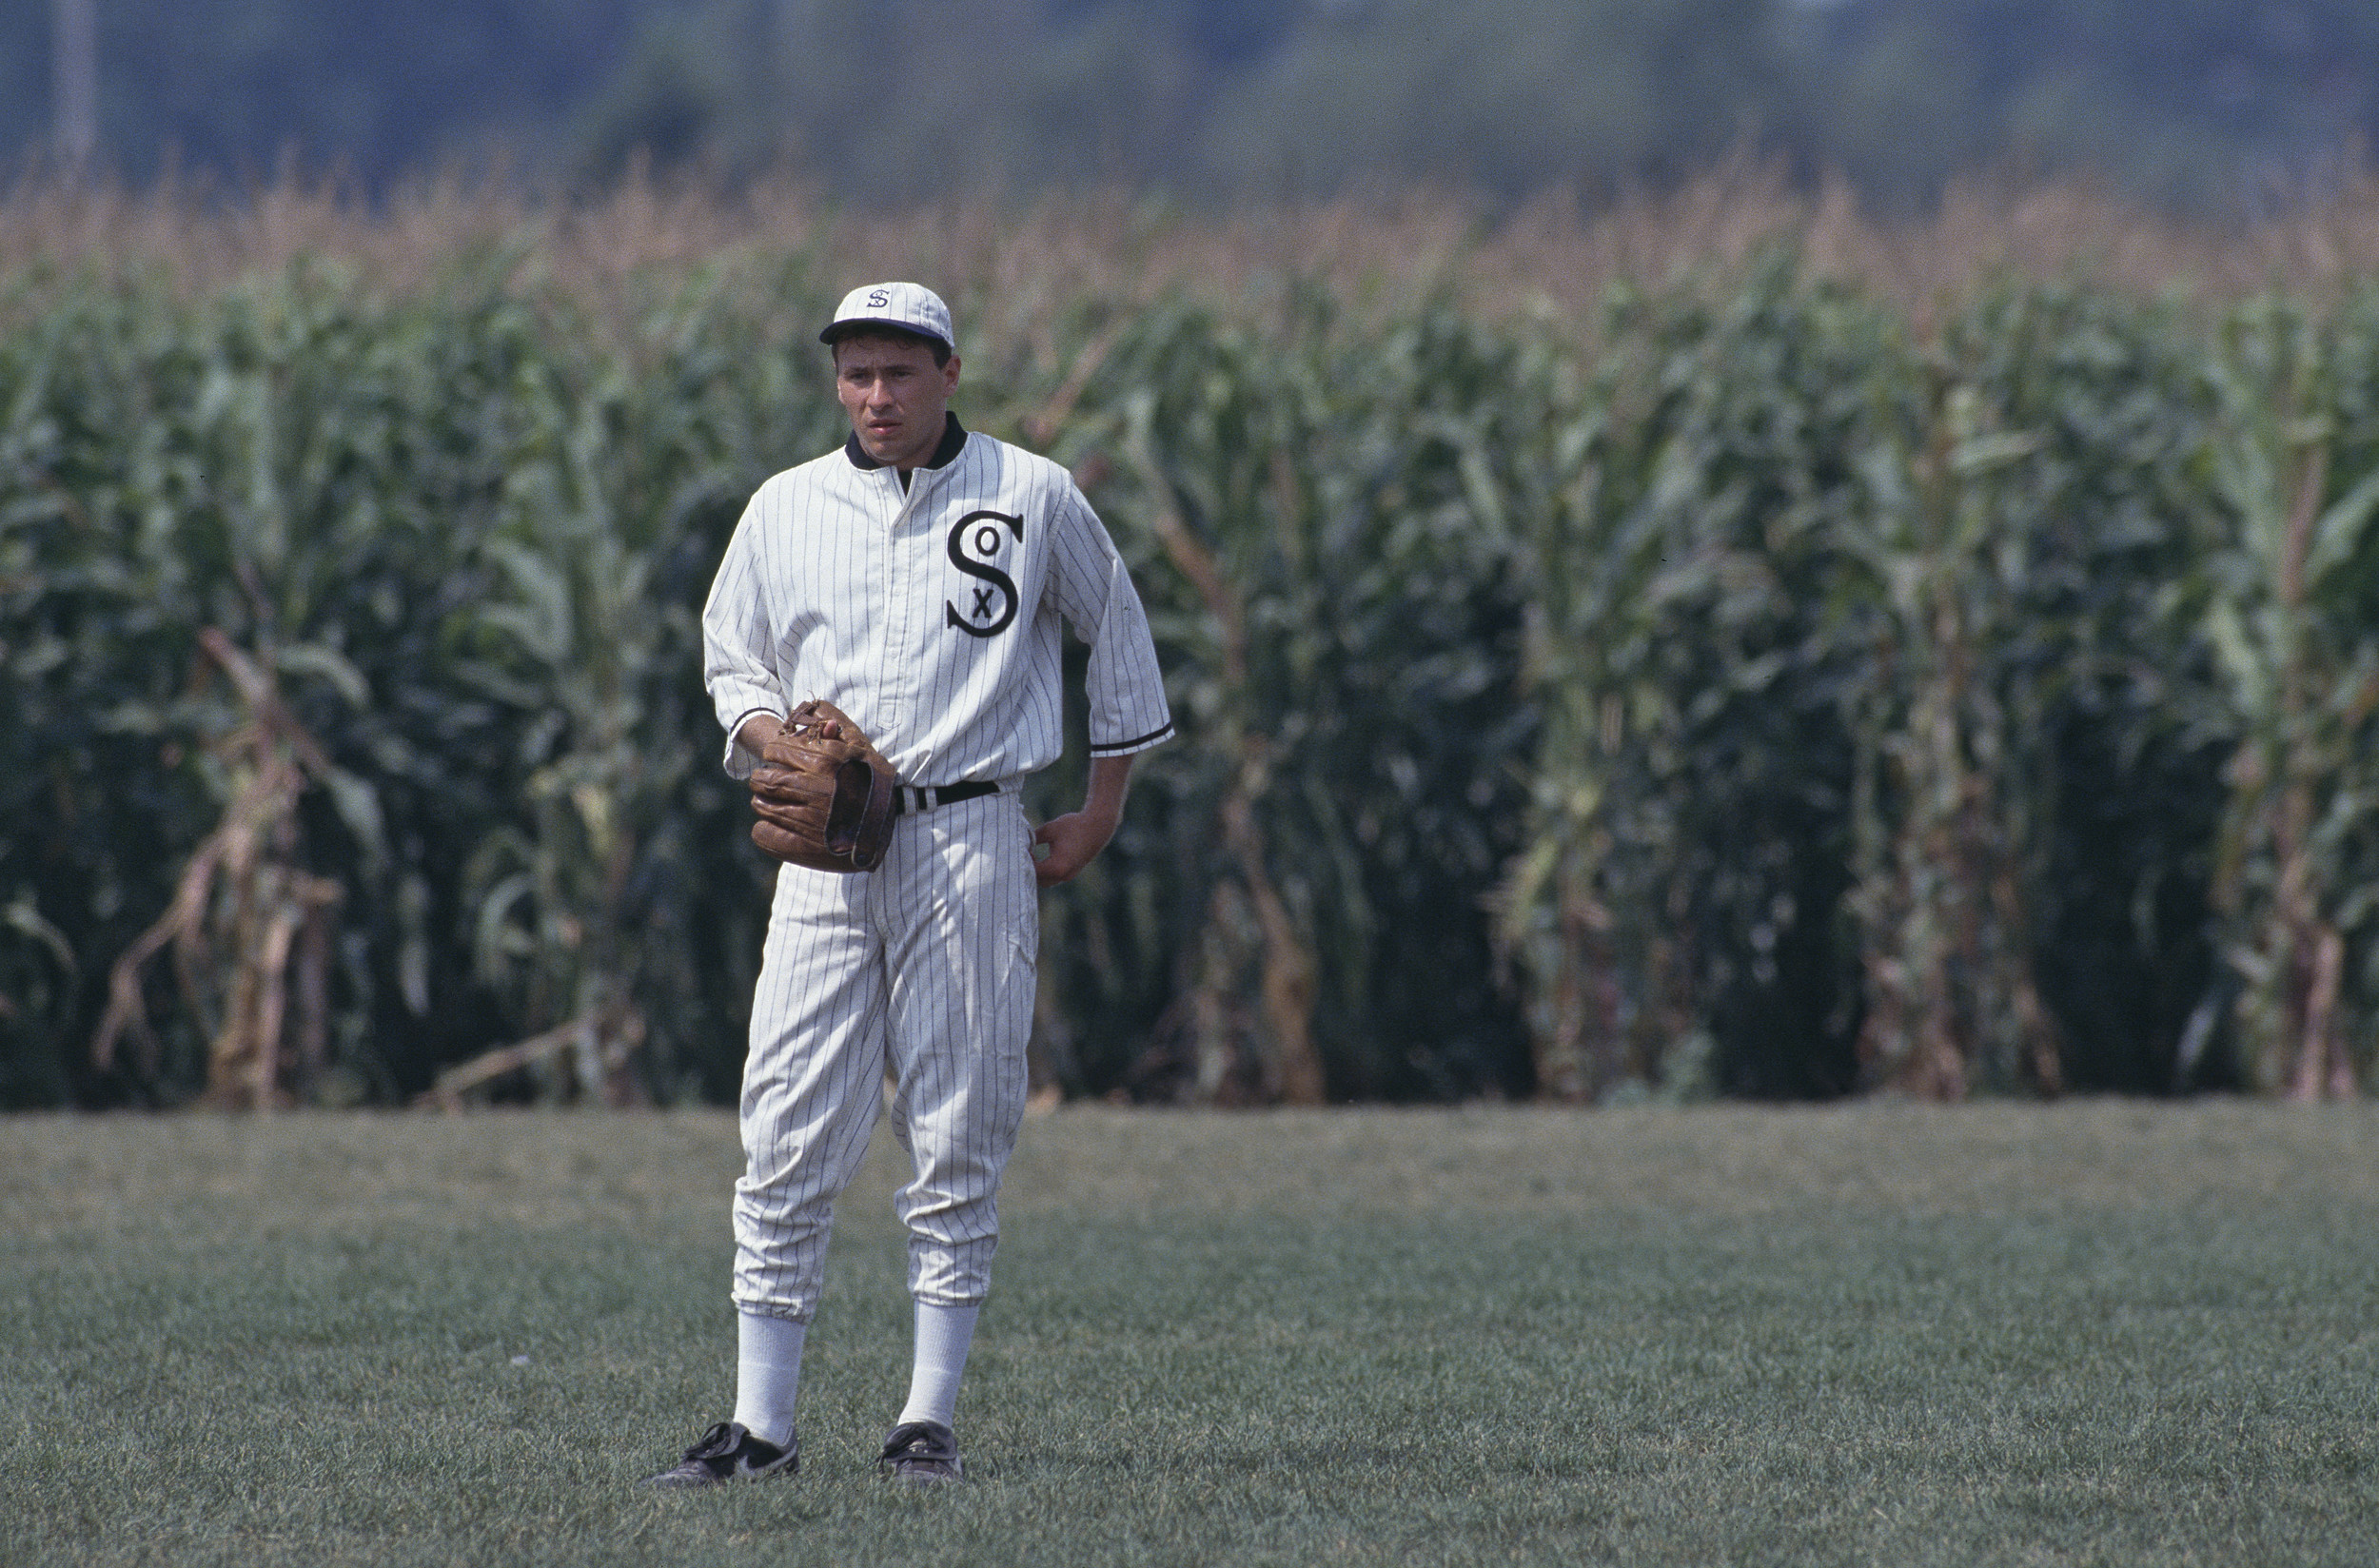 Field of Dreams Game Tonight LIVE From Iowa-Yankees vs White Sox